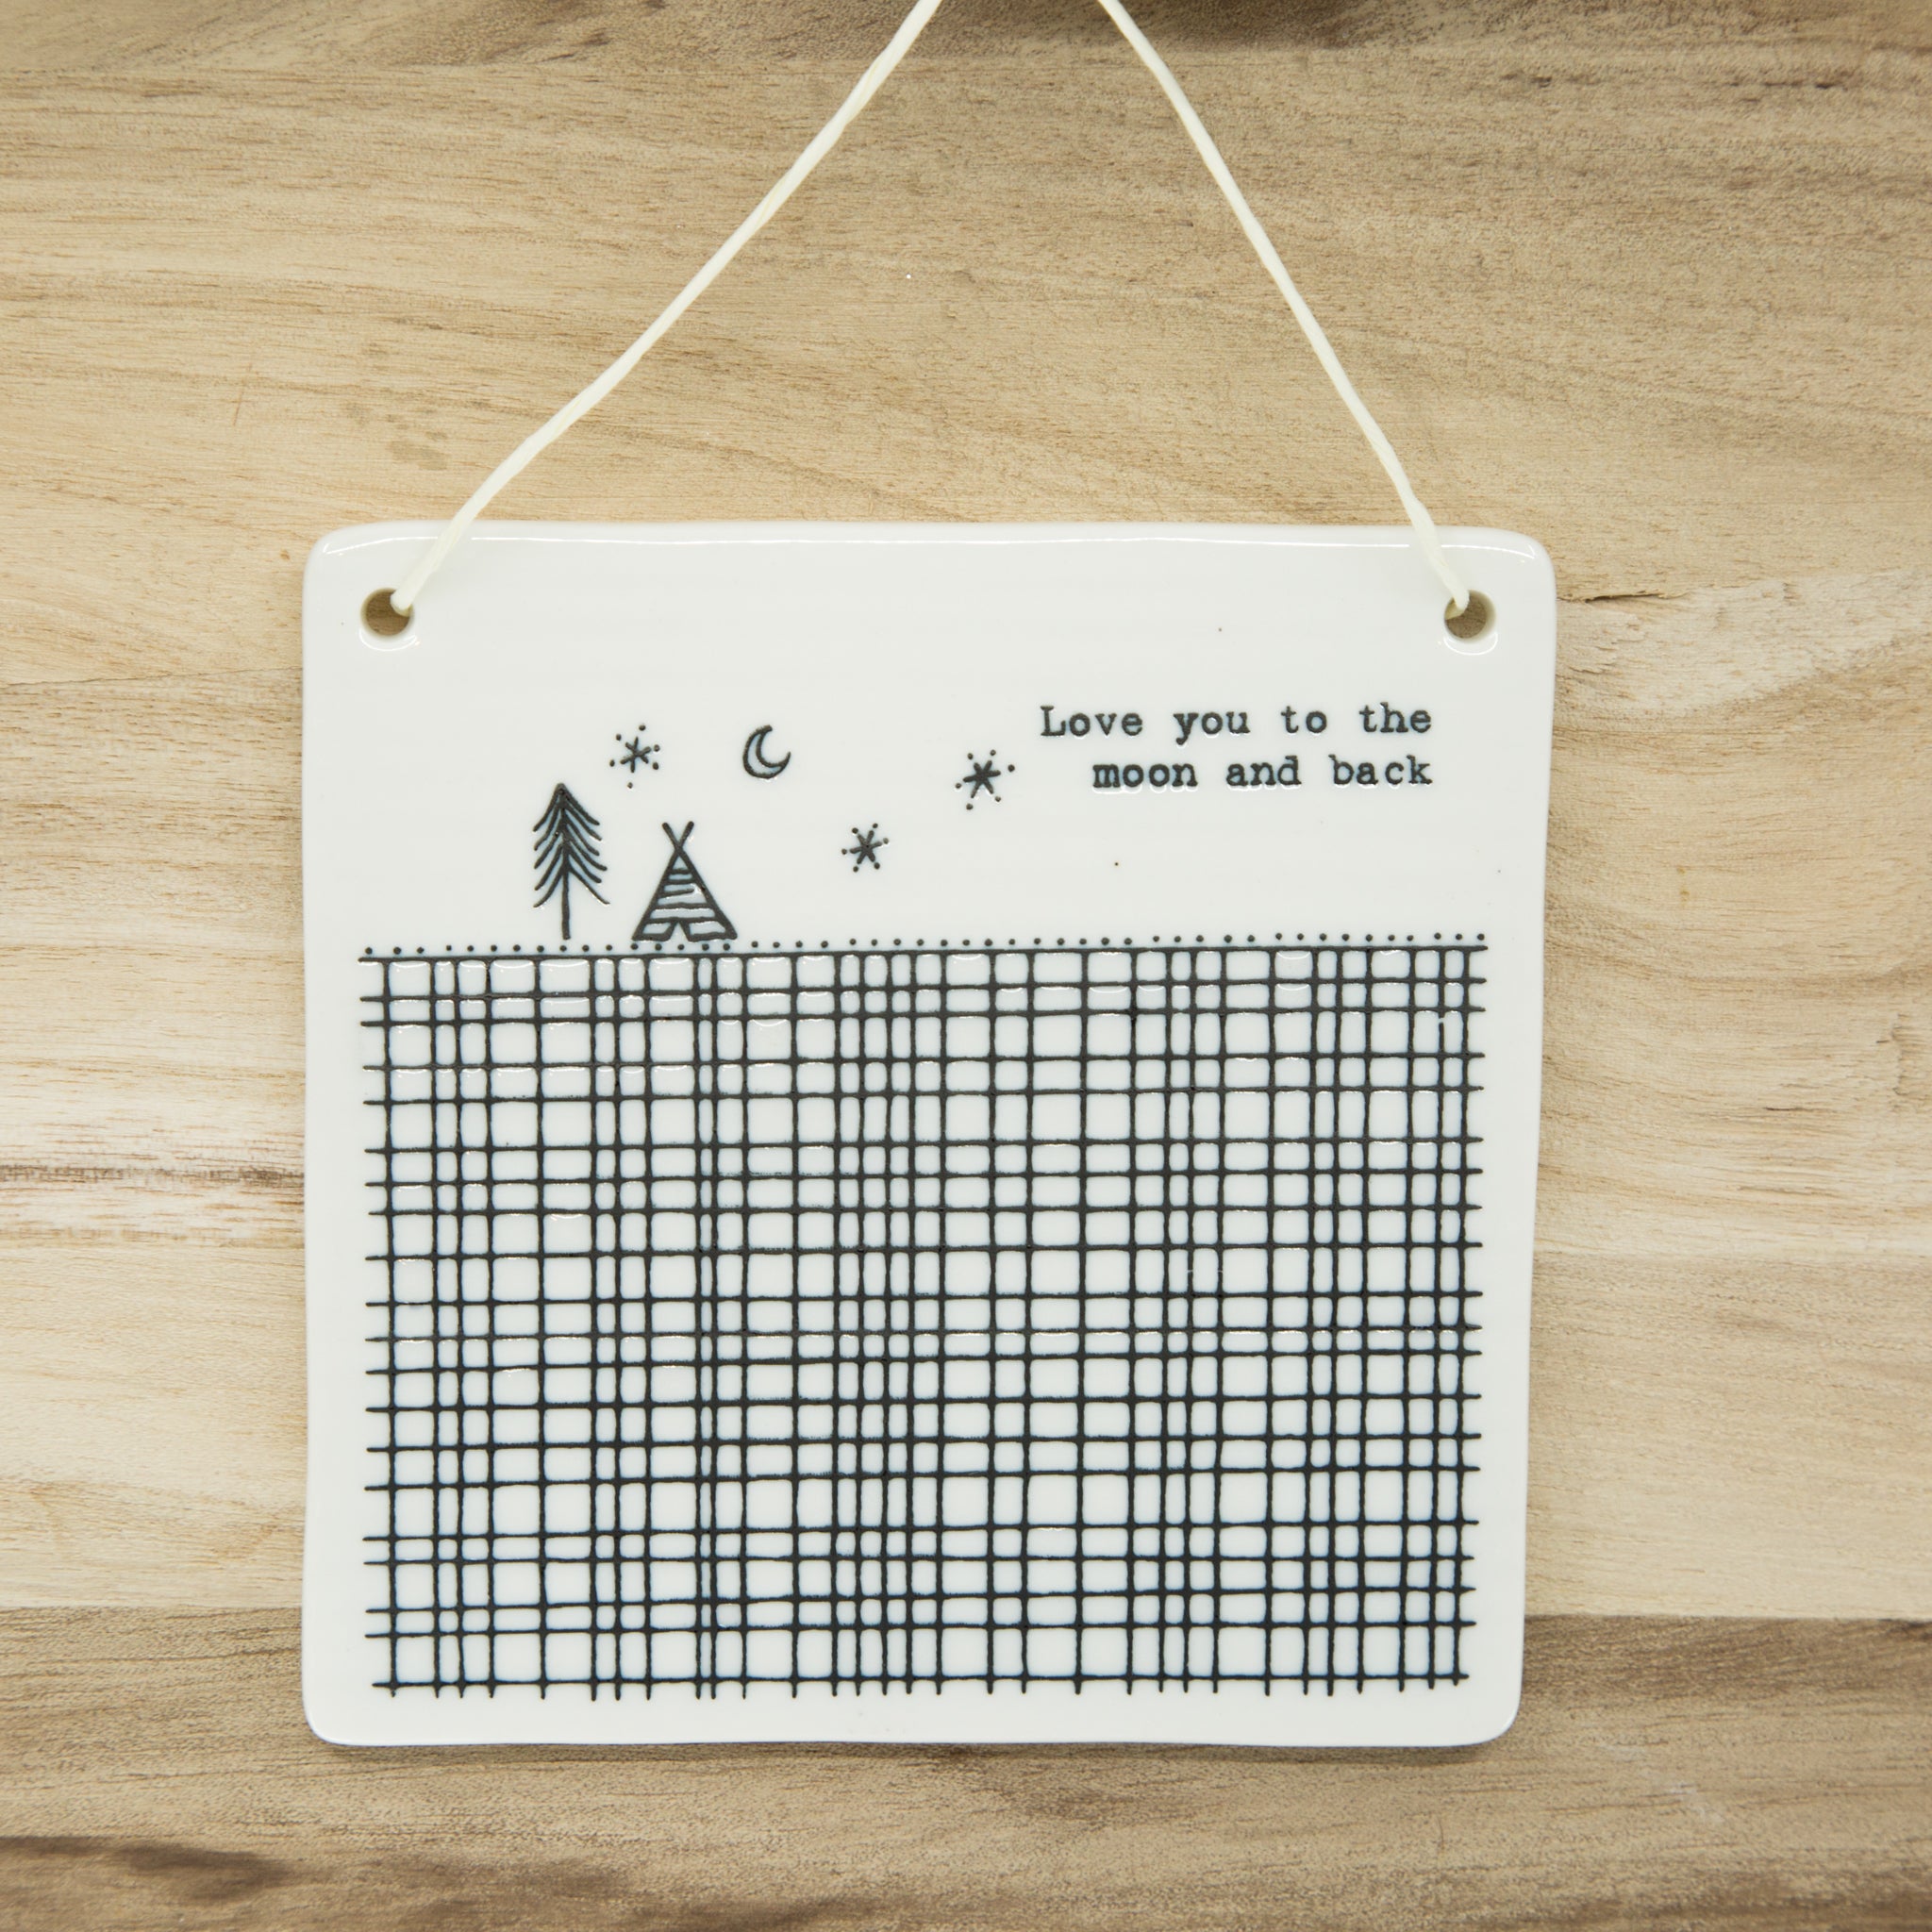 Love you to the moon and back - Square Porcelain Hanger